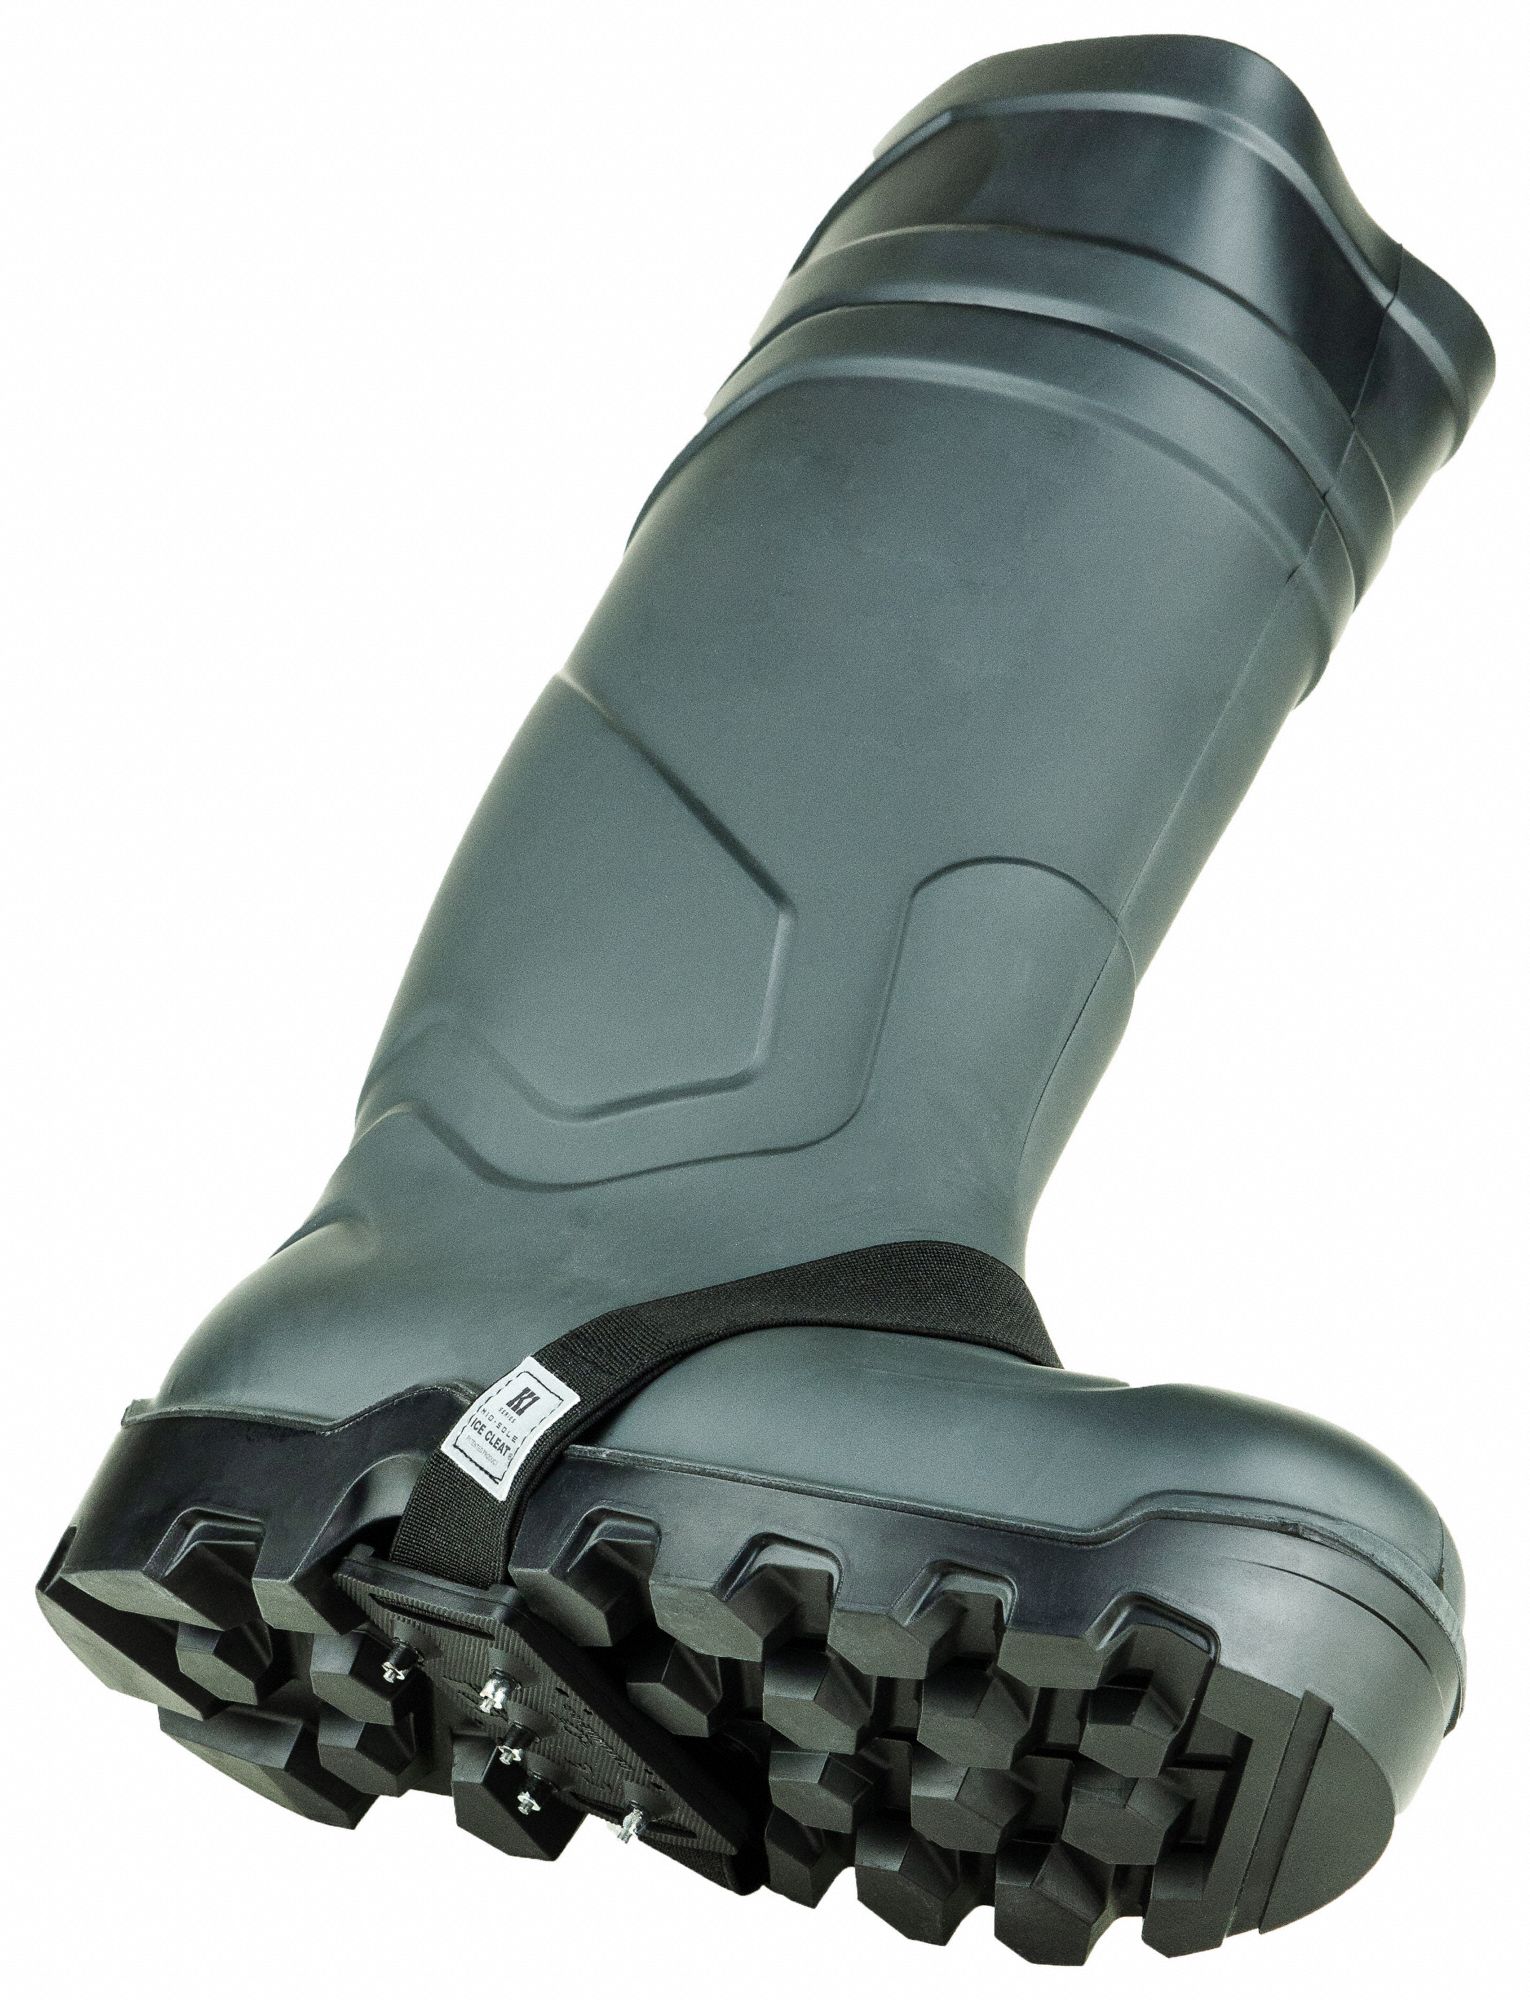 Traction Device,  Unisex,  Universal,  Stud - High  Profile Traction Type,  1 PR